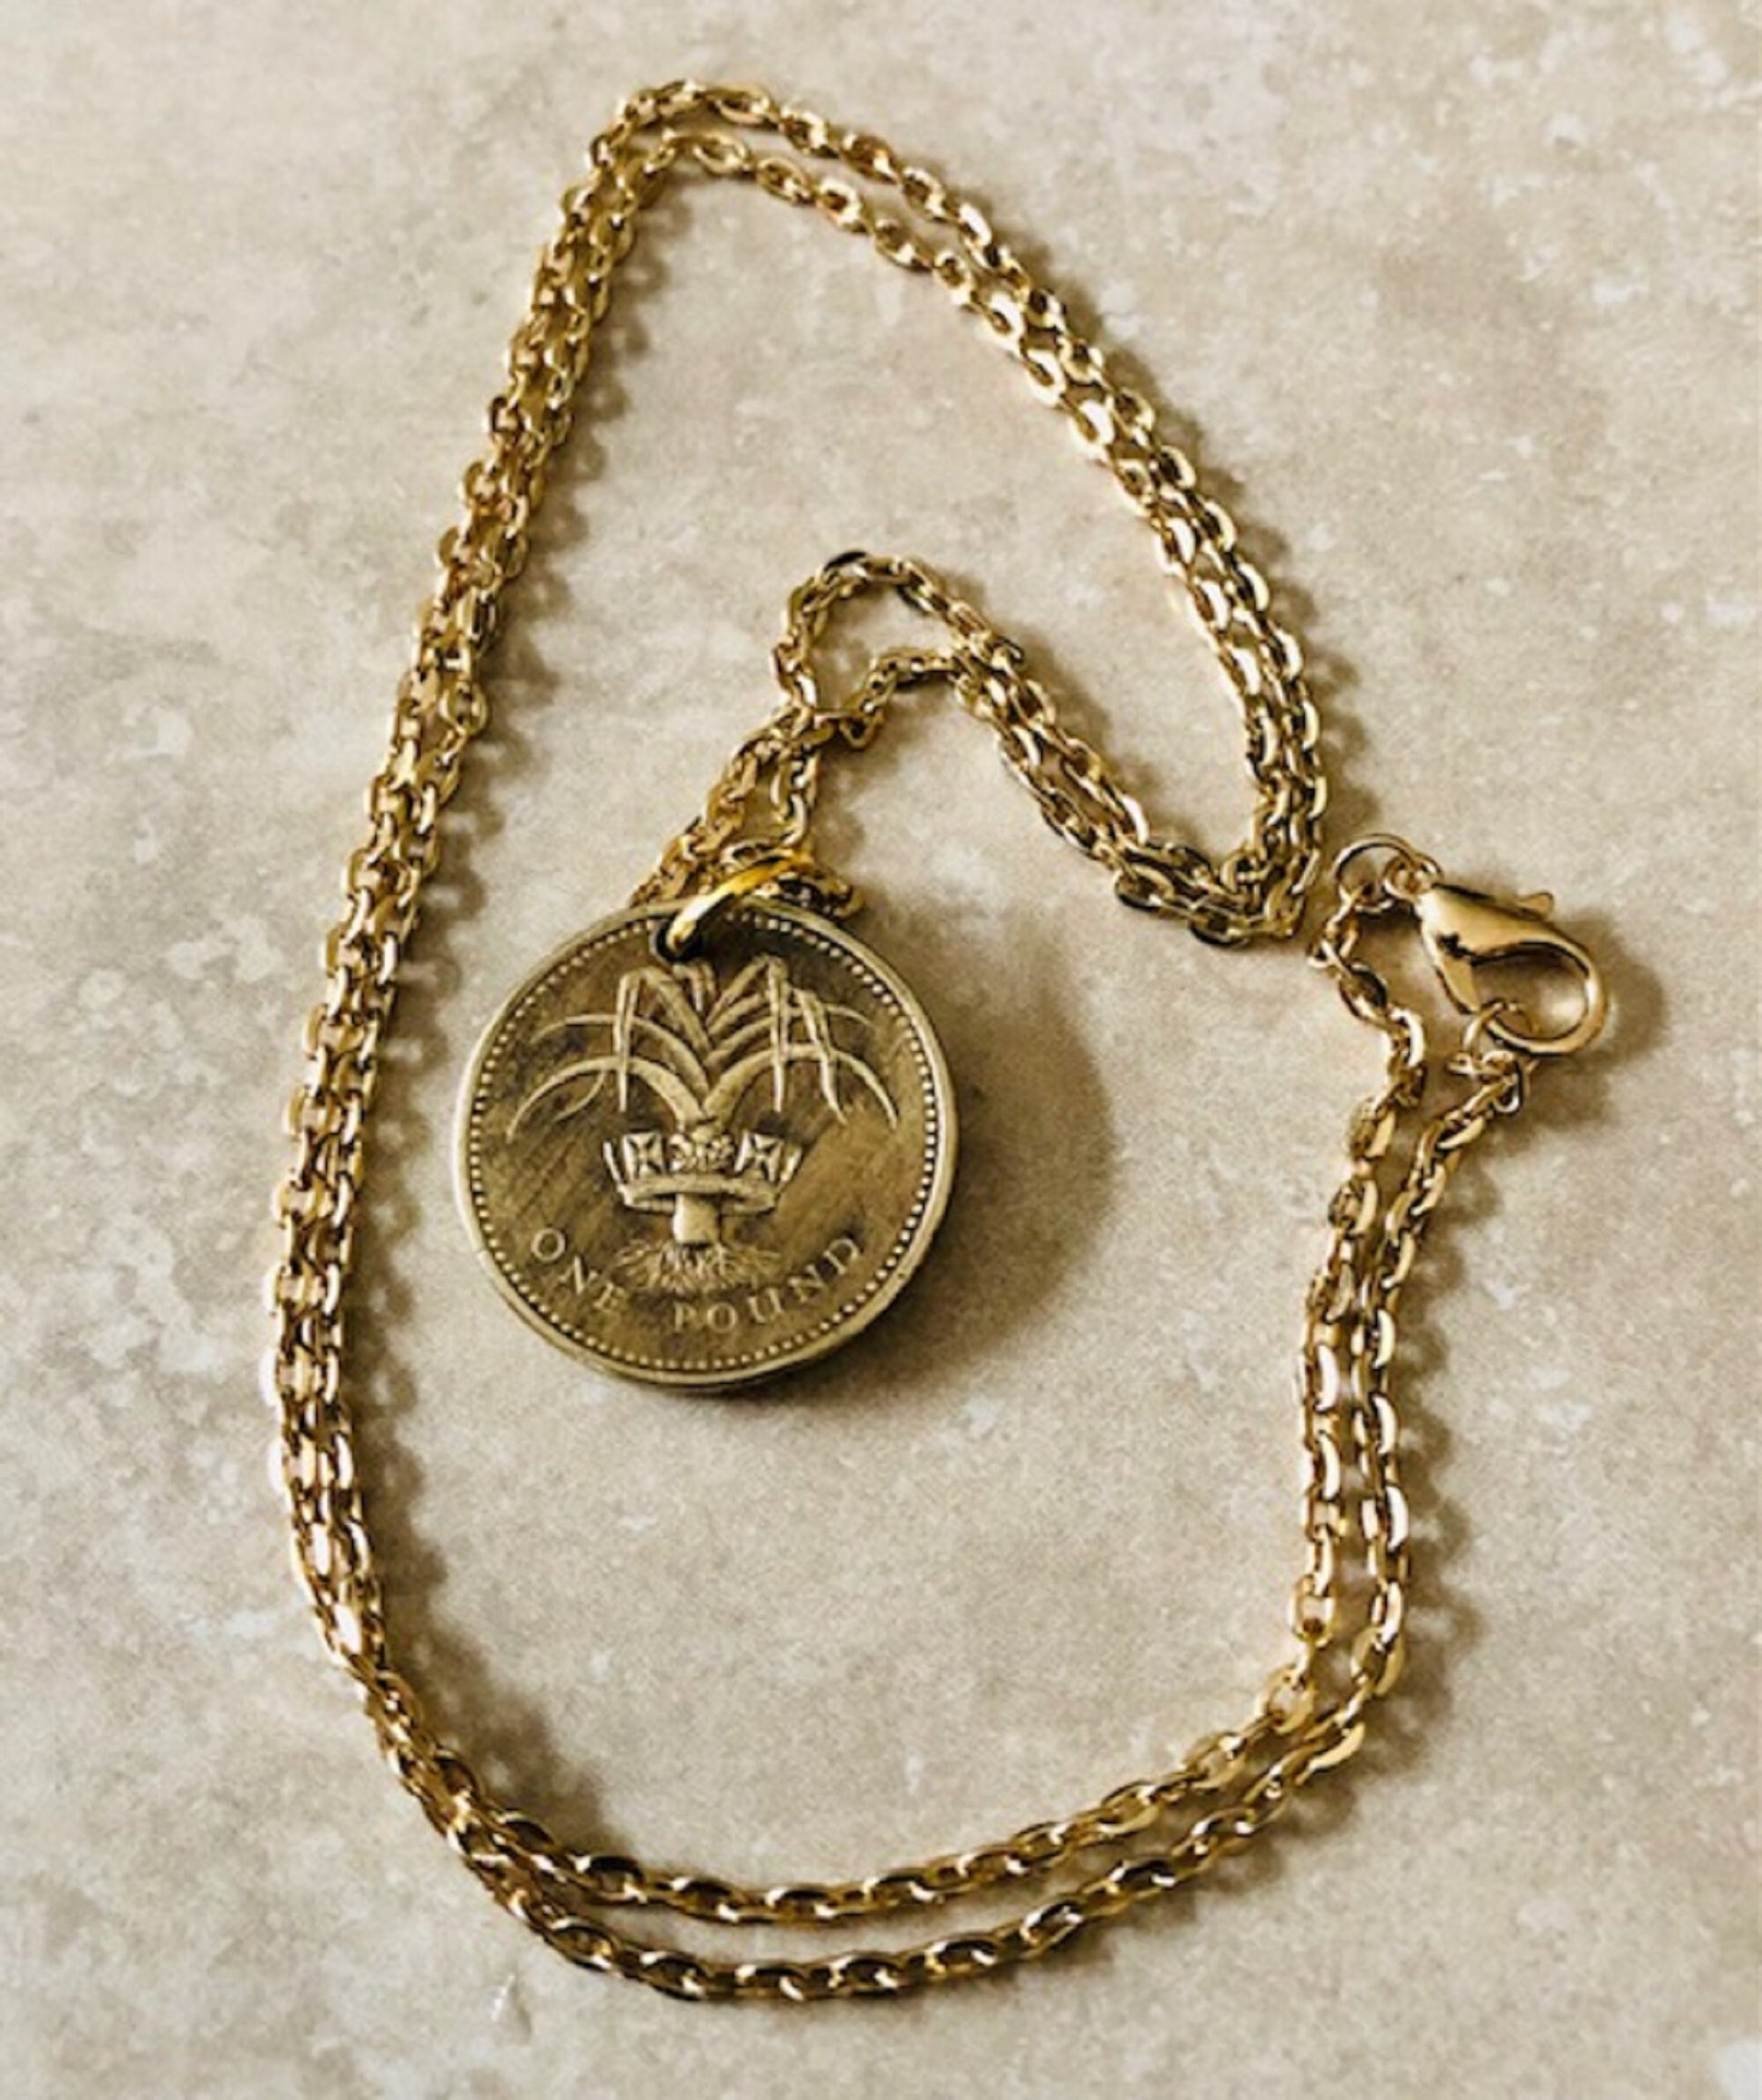 United Kingdom Coin Necklace One Pound UK Pendant Vintage Custom Jewelry Rare coins - Coin Enthusiast Fashion Accessory Handmade